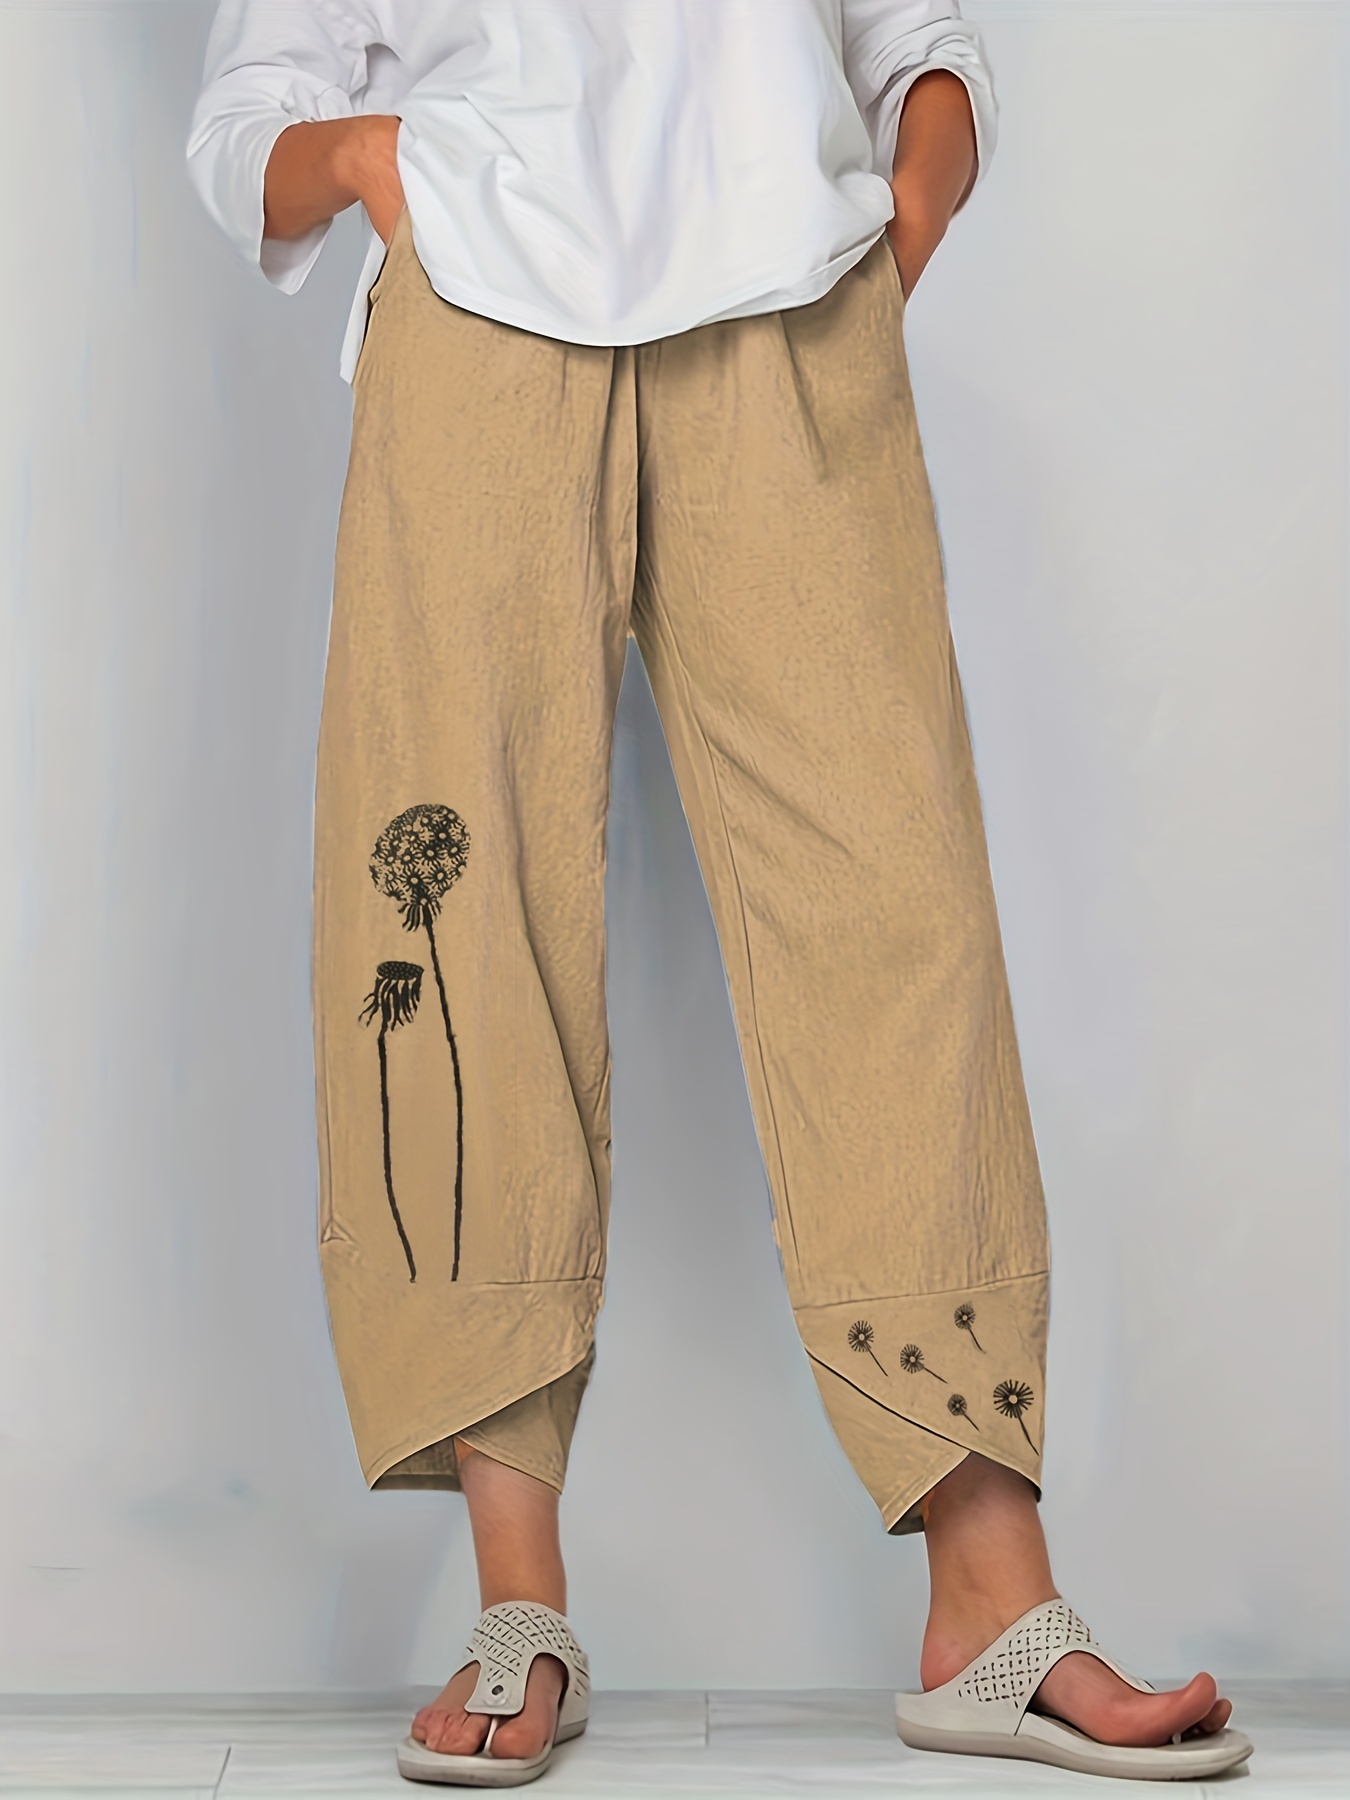 Boho Solid Elastic Waist Harem Pants, Casual Long Length Pants With Pockets  For Spring & Summer, Women's Clothing